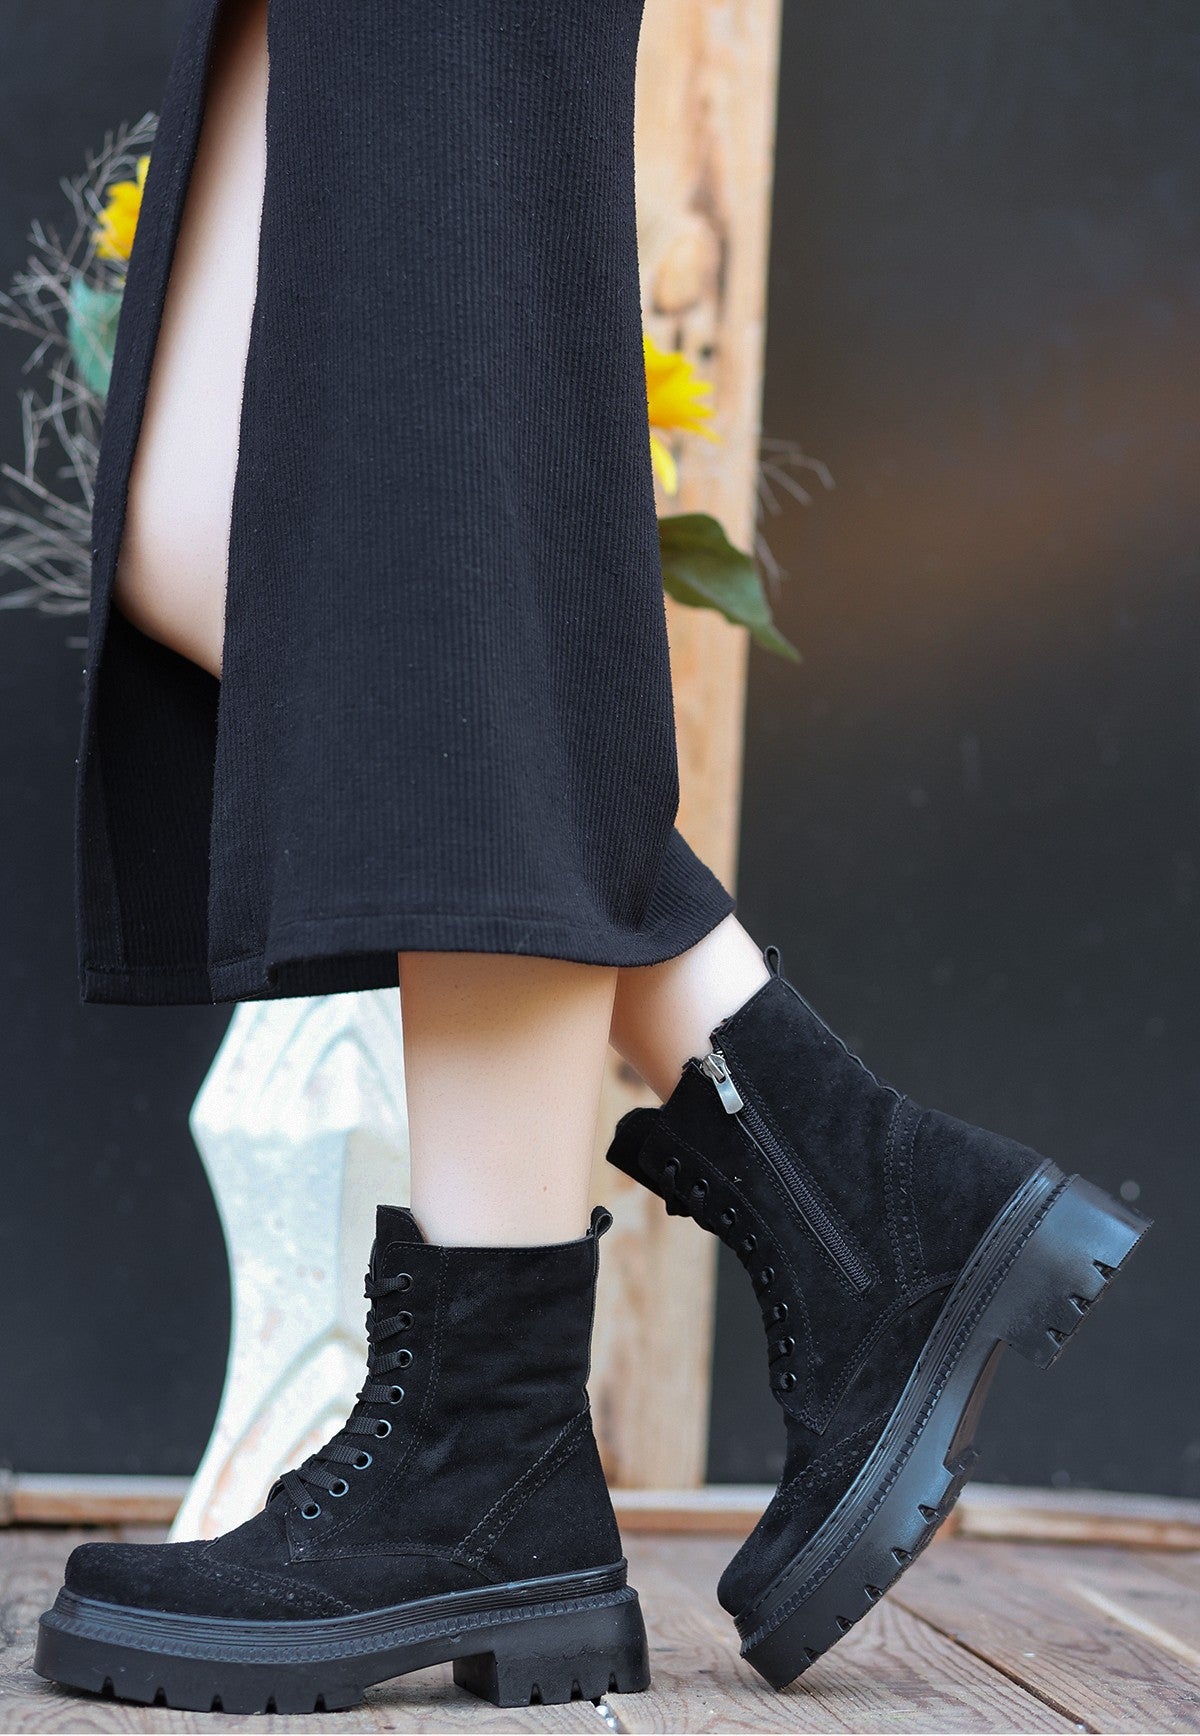 Women's Perf Black Suede Lace-Up Boots - STREETMODE ™